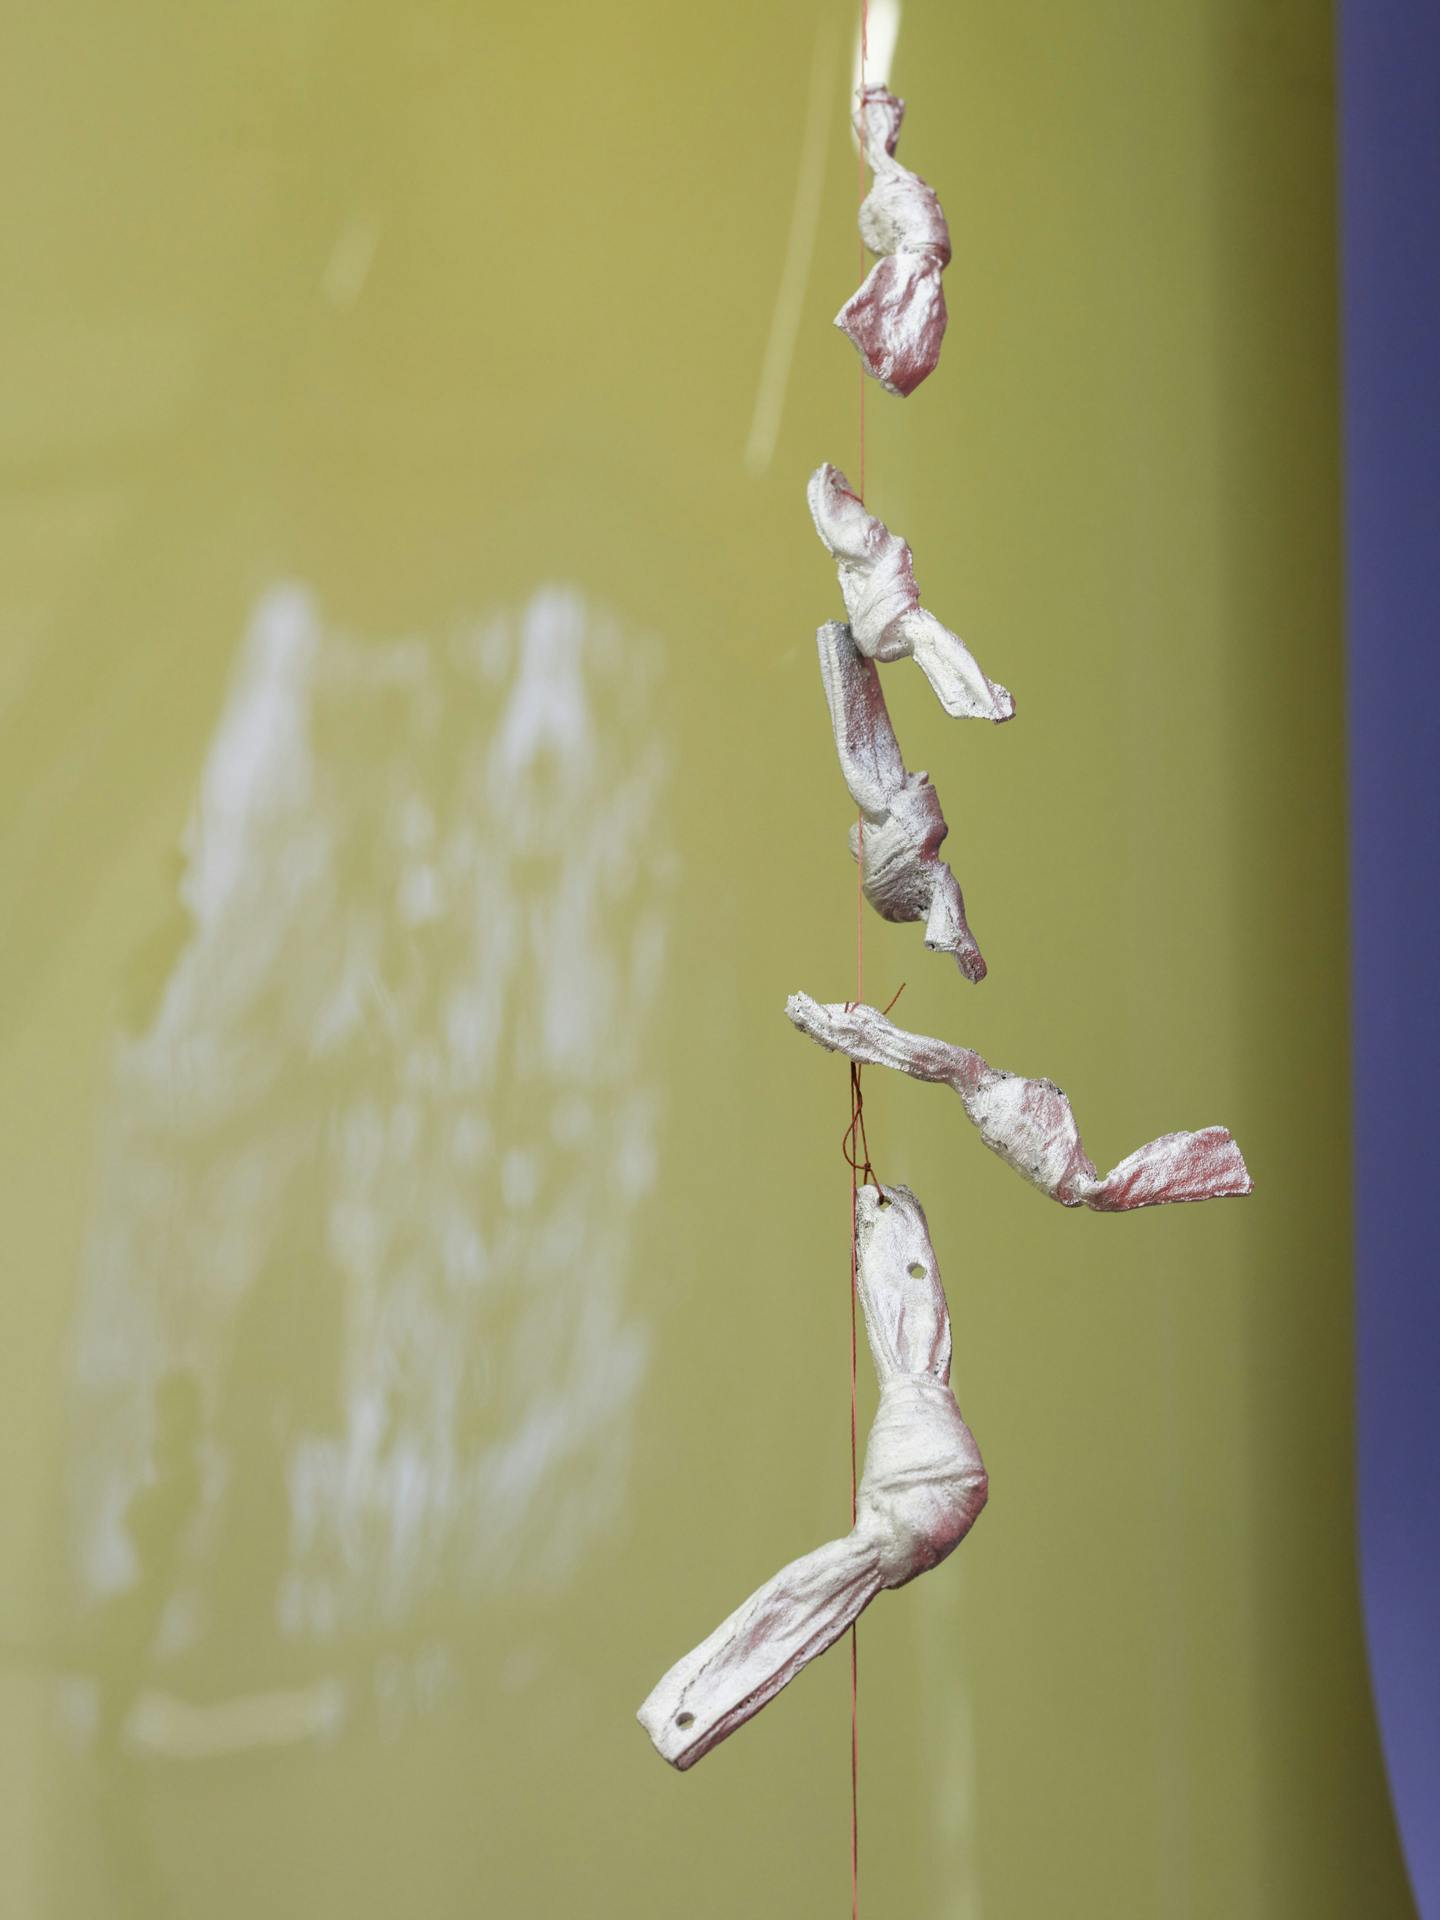 Silver sculptures hanging in a vertical arrangement from a string cast shadows on a hanging sheet of yellow photographic film.